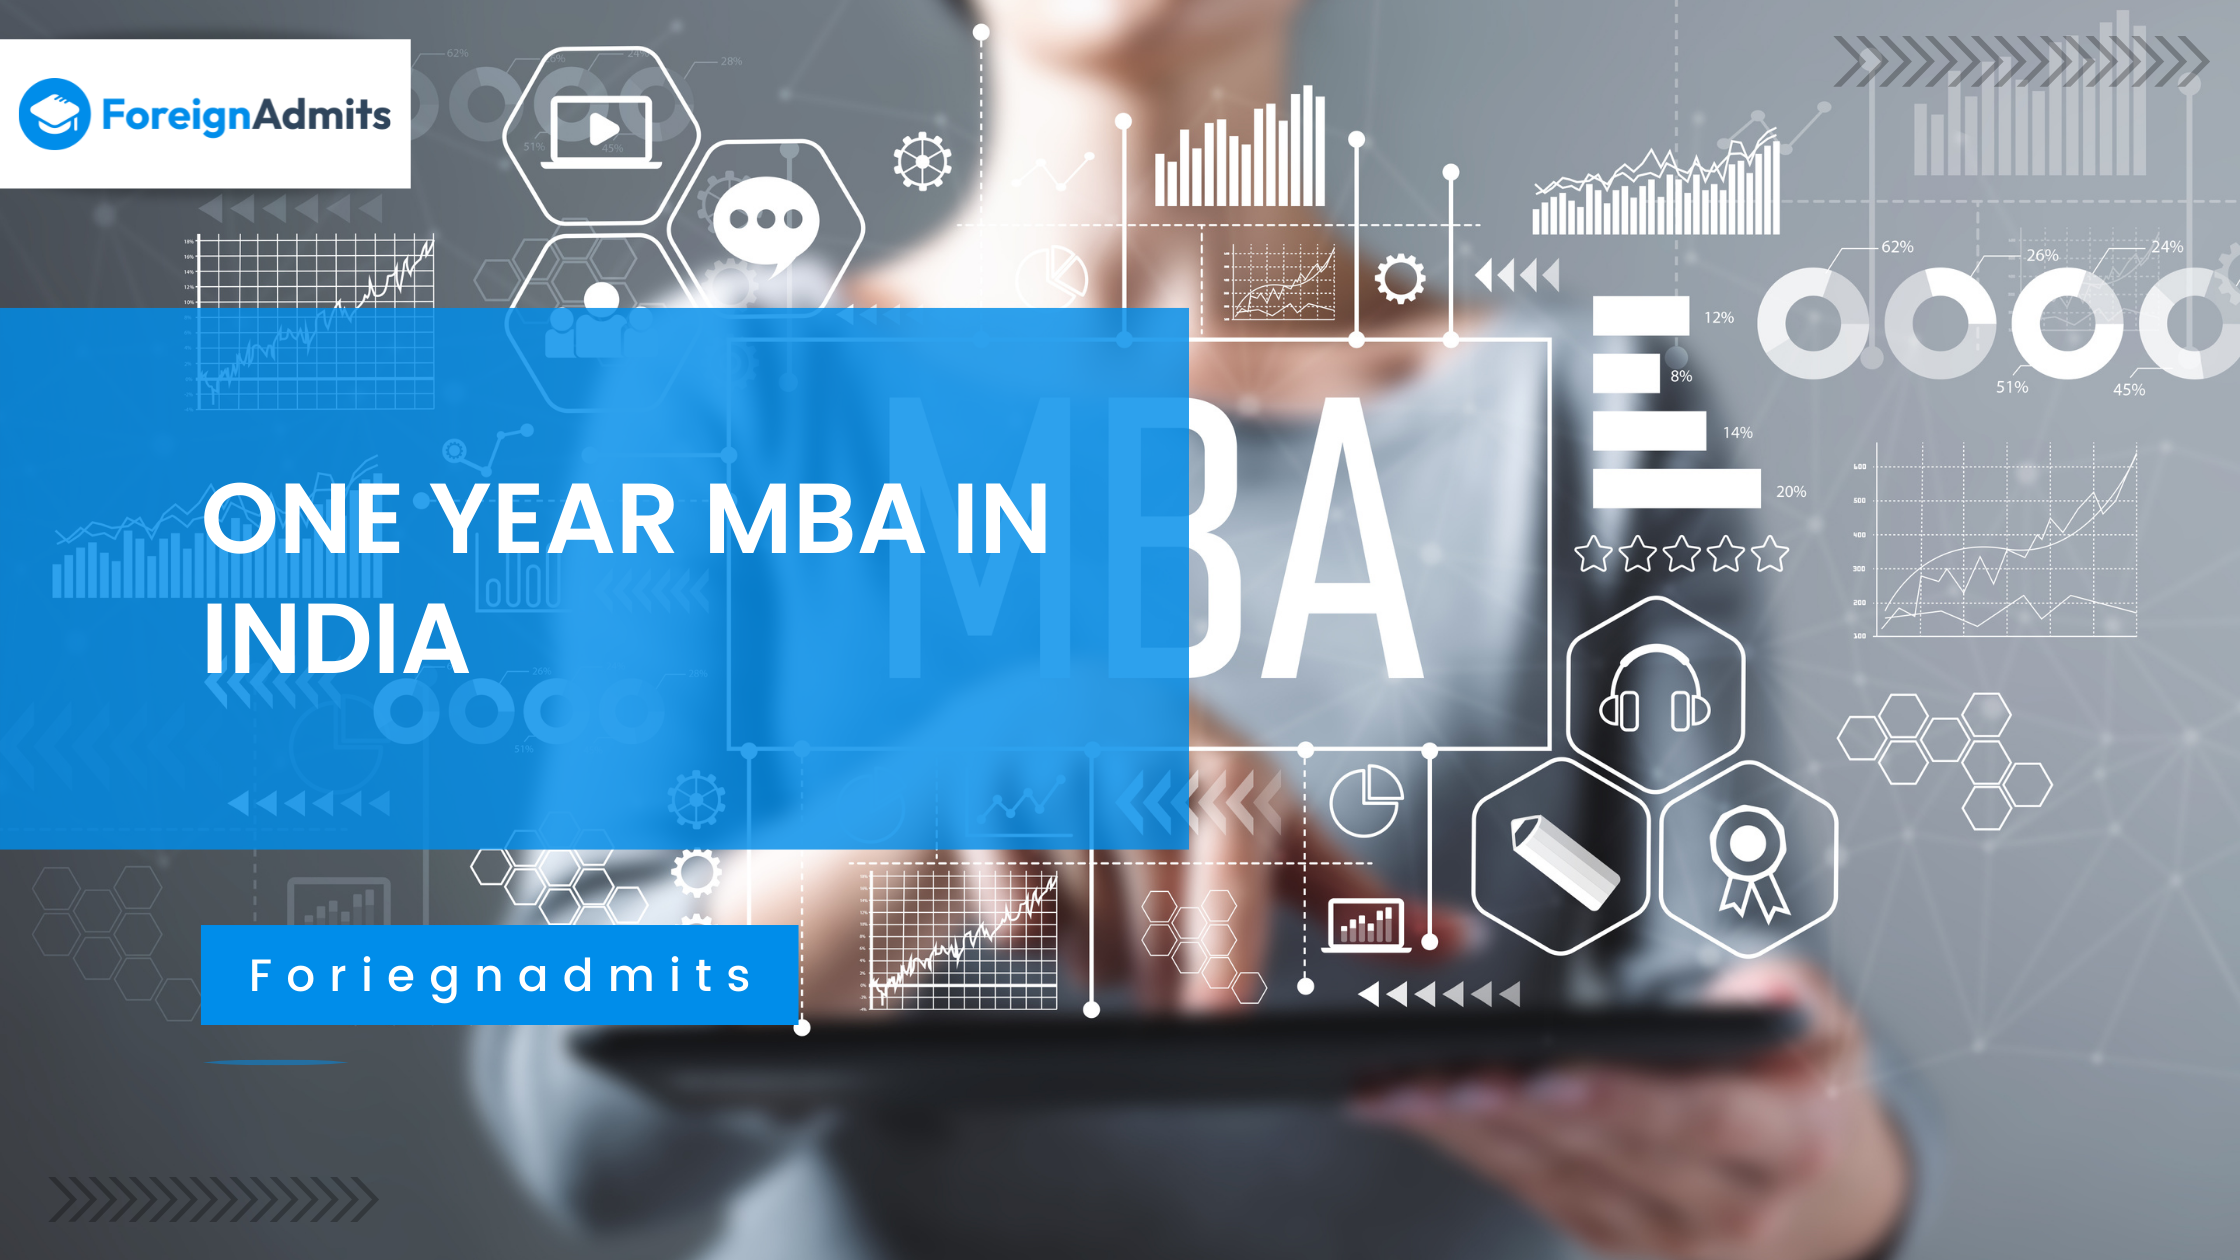 One year MBA in India